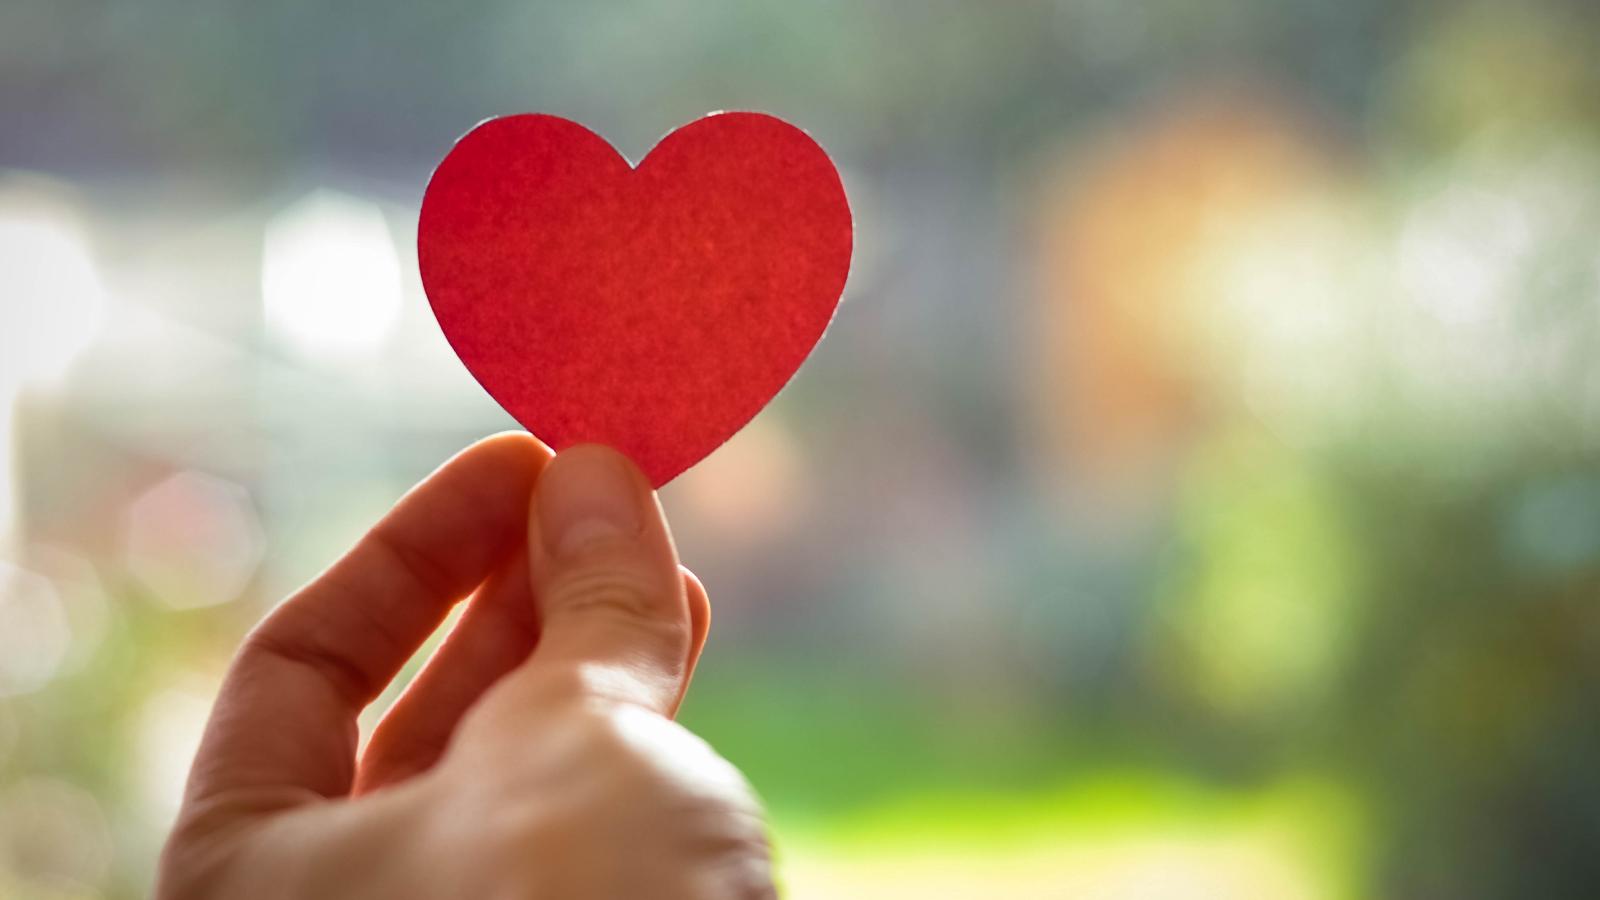 A hand holds up a red paper heart against a blurry background.